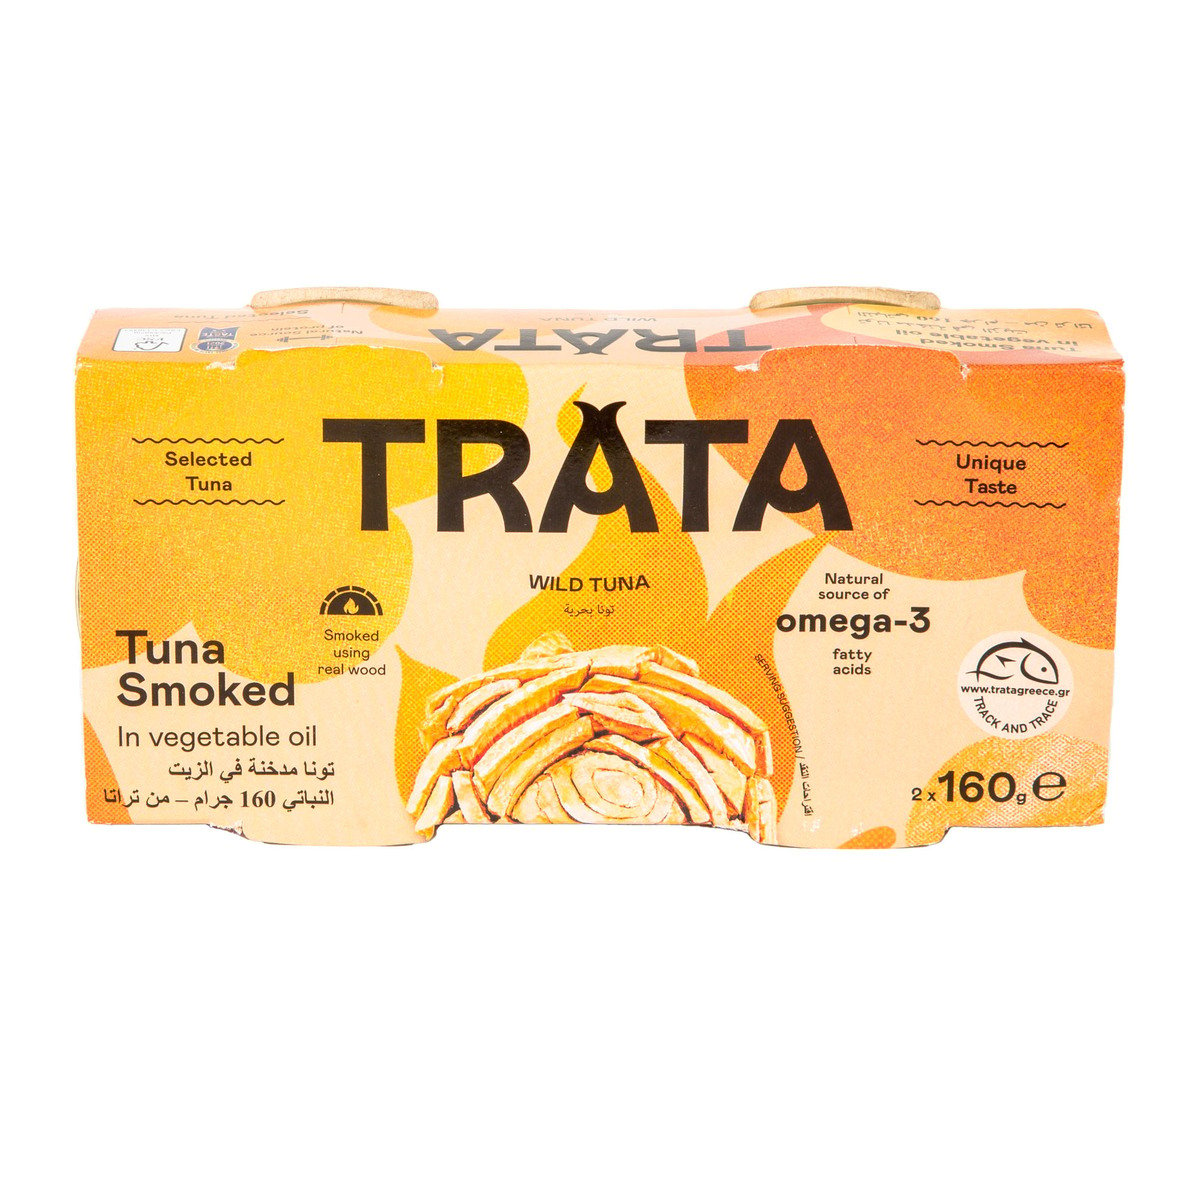 Trata Smoked Tuna In Vegetable Oil 2 x 160 g